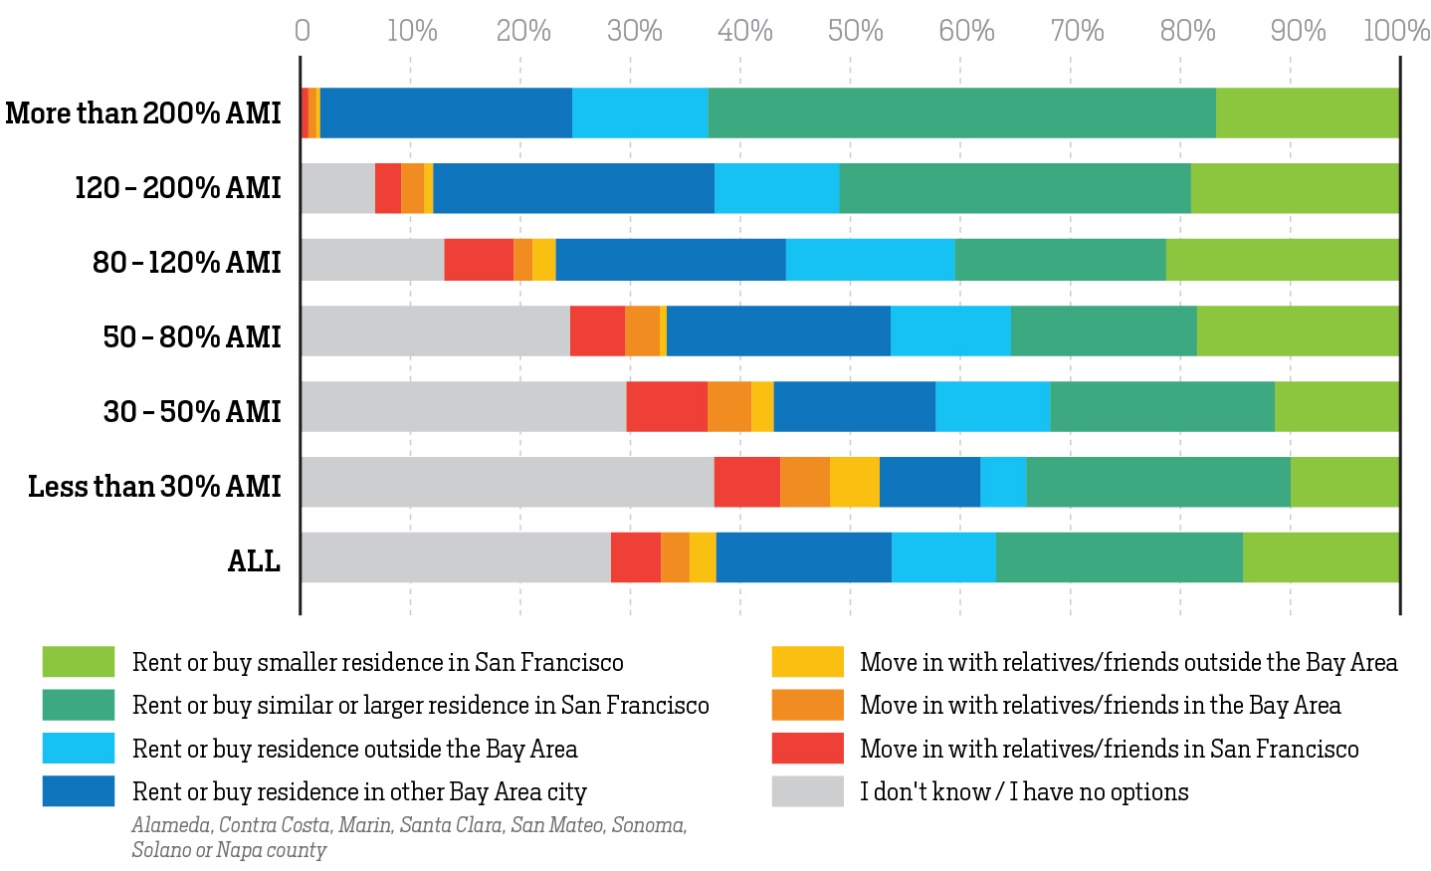 Figure 5. Housing choices for 2018 San Francisco Housing Survey respondents if forced out of their current residence by income group.